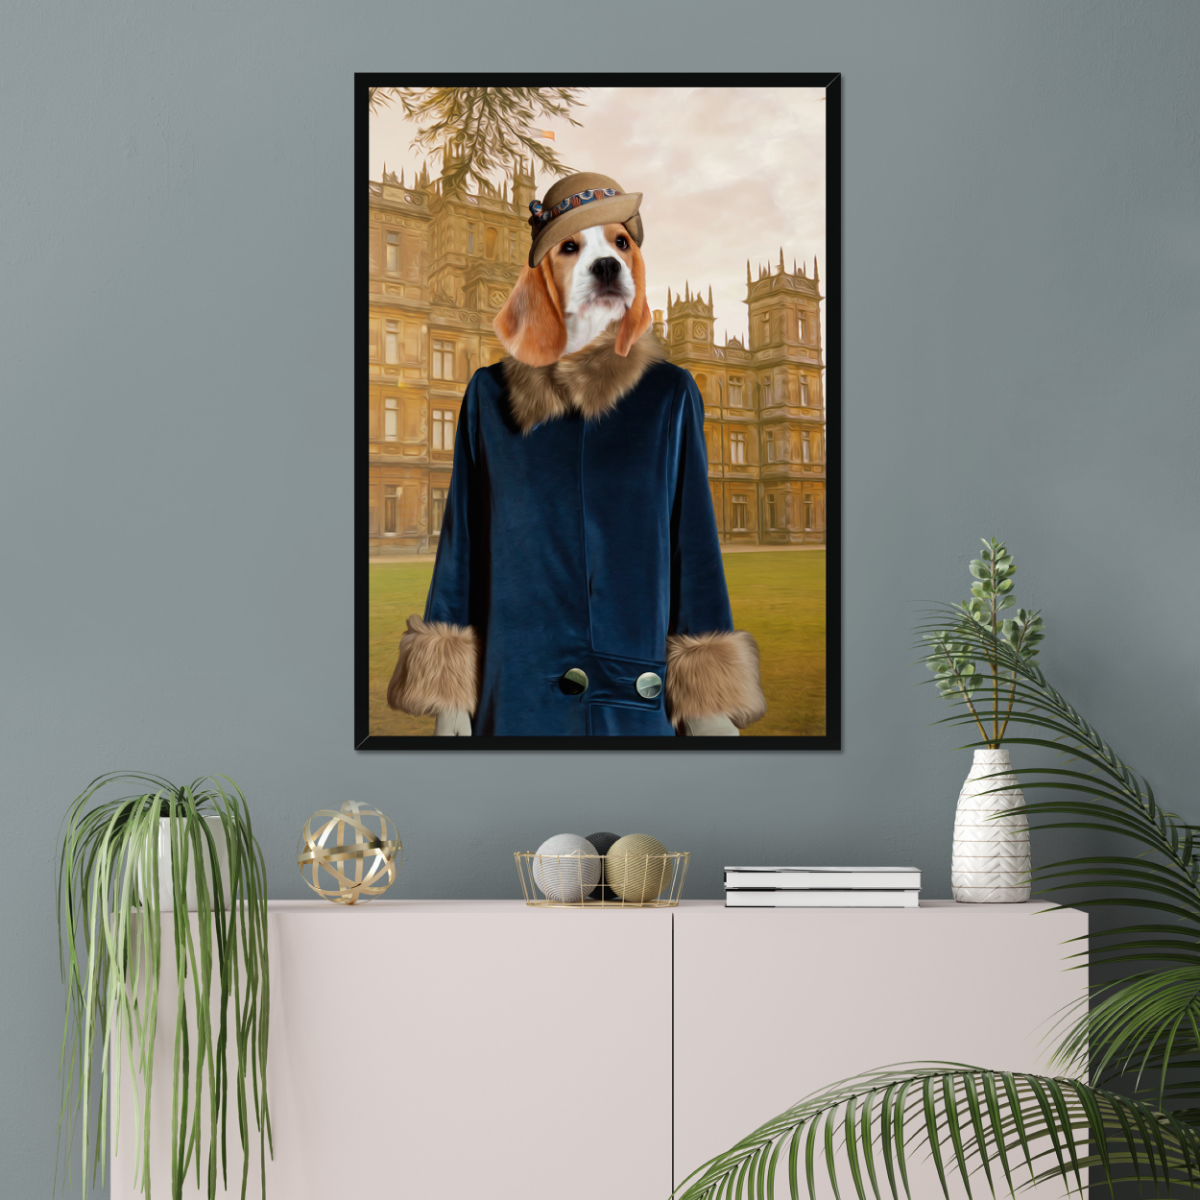 Lady Anne (Downton Abbey Inspired): Custom Pet Portrait - Paw & Glory, paw and glory, paintings of pets from photos, for pet portraits, dog astronaut photo, paw portraits, custom pet painting, pet portrait admiral, pet portraits